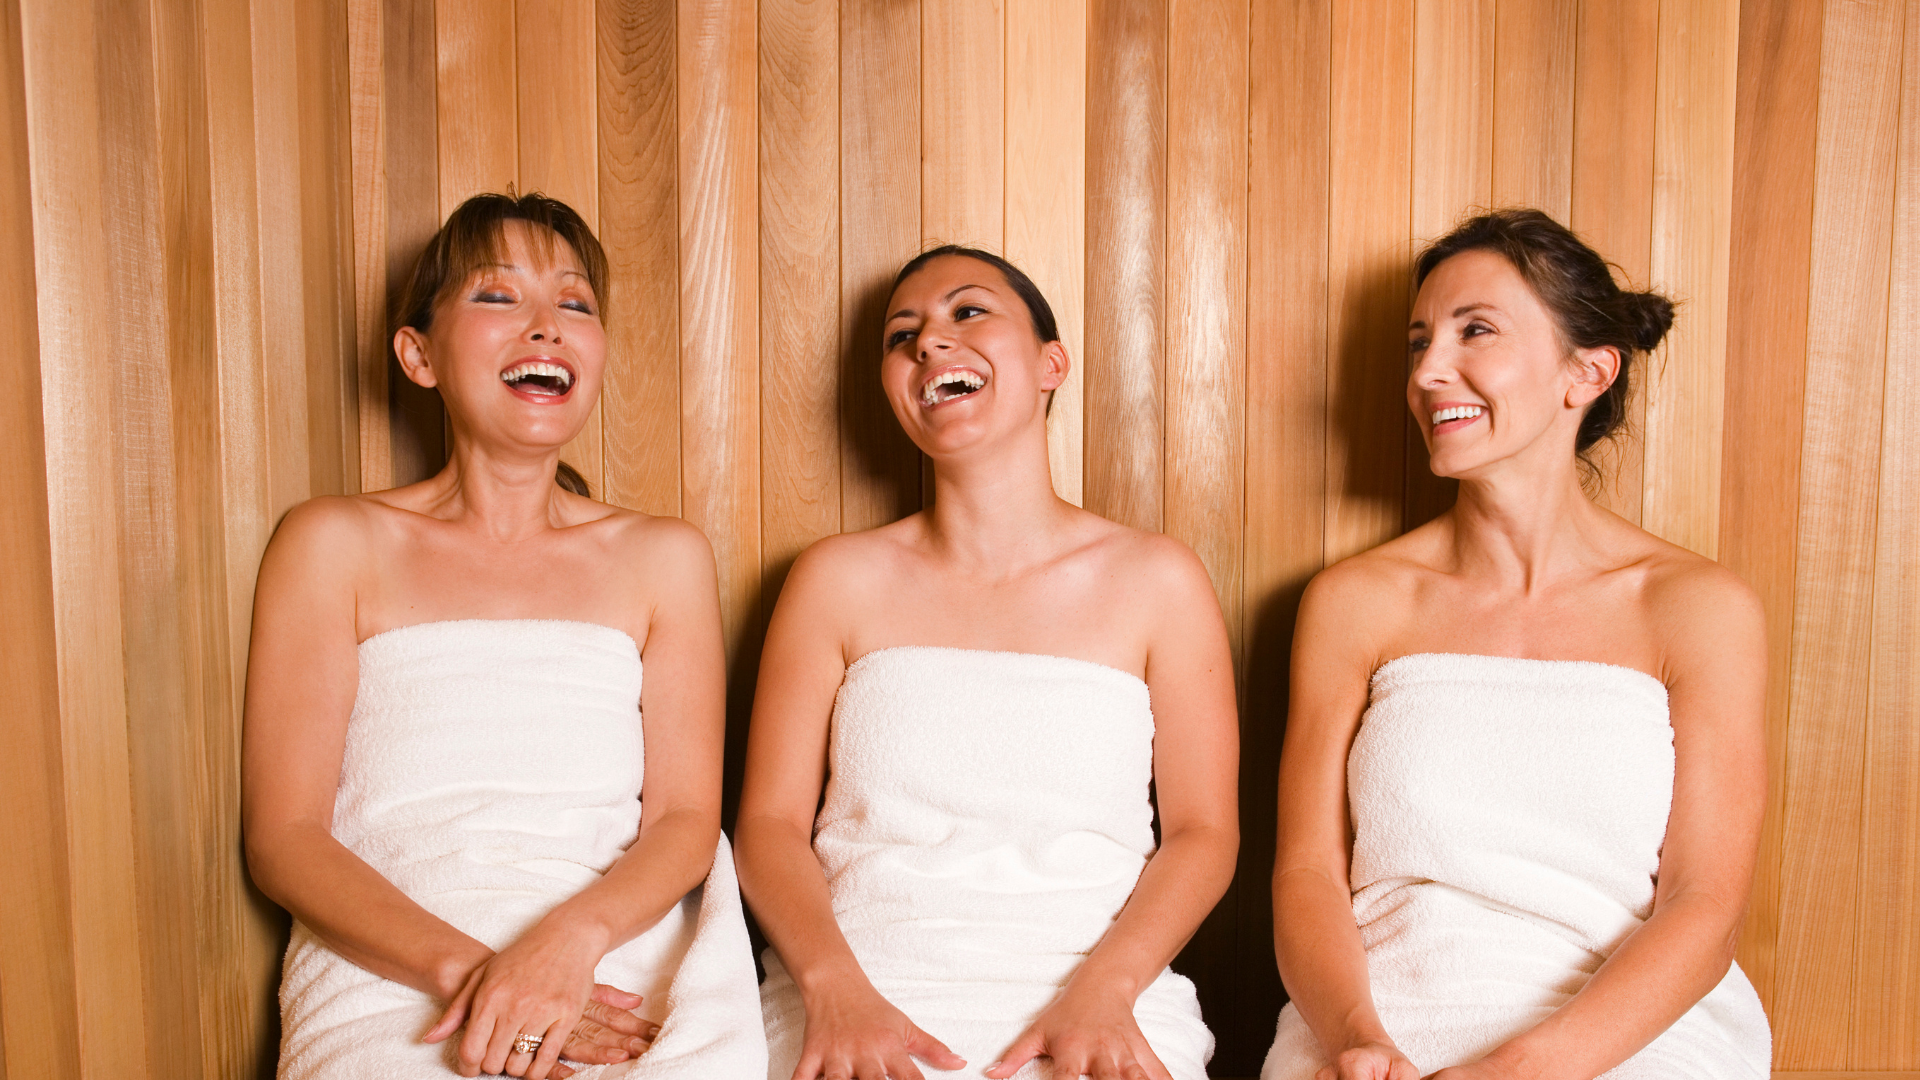 The Truth About Saunas: Separating Fact from Fiction